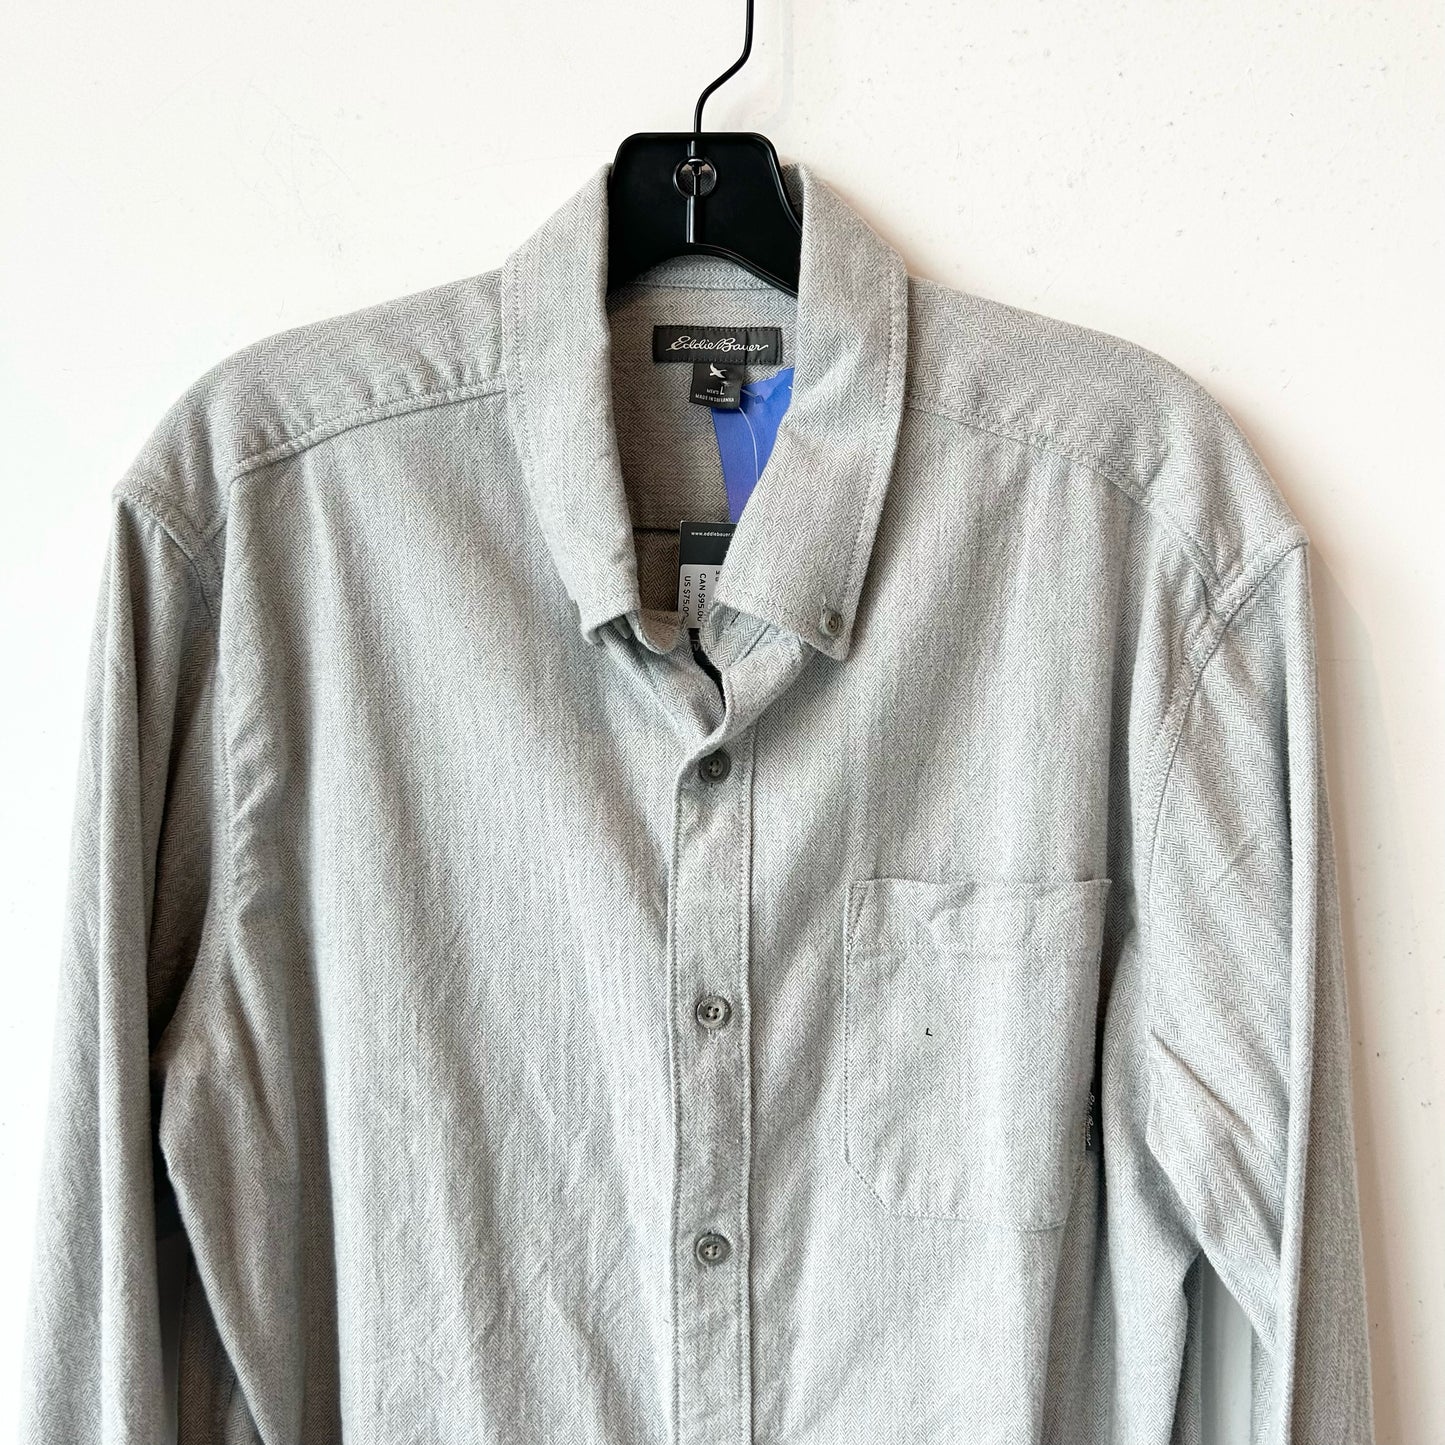 L Eddie Bauer Gray Button Up Long Sleeve